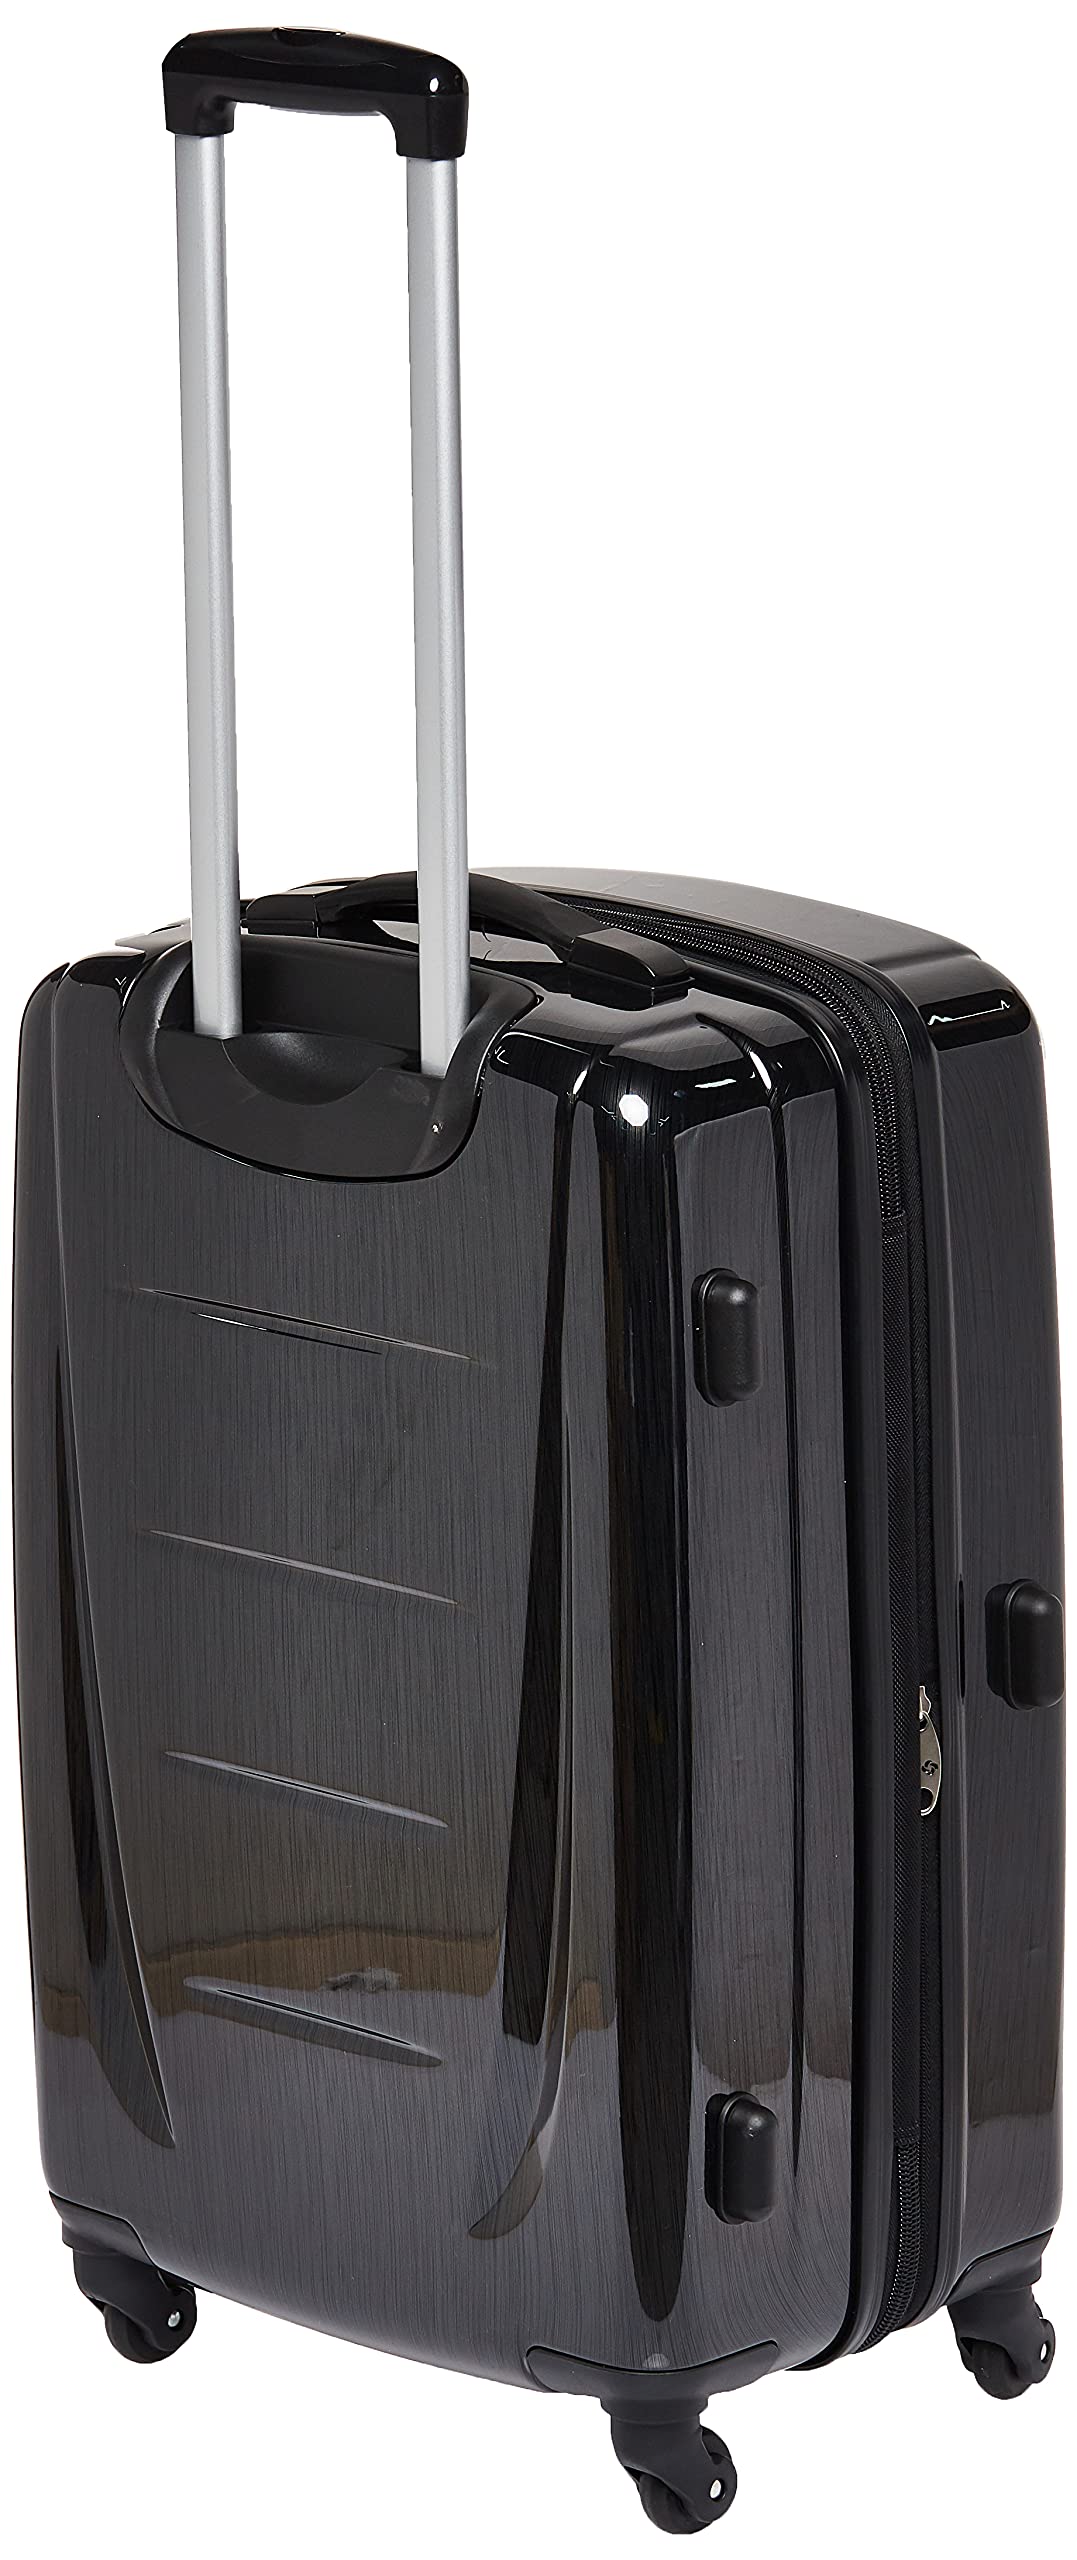 Samsonite Winfield 2 Hardside Luggage with Spinner Wheels, 3-Piece Set (20/24/28), Brushed Anthracite